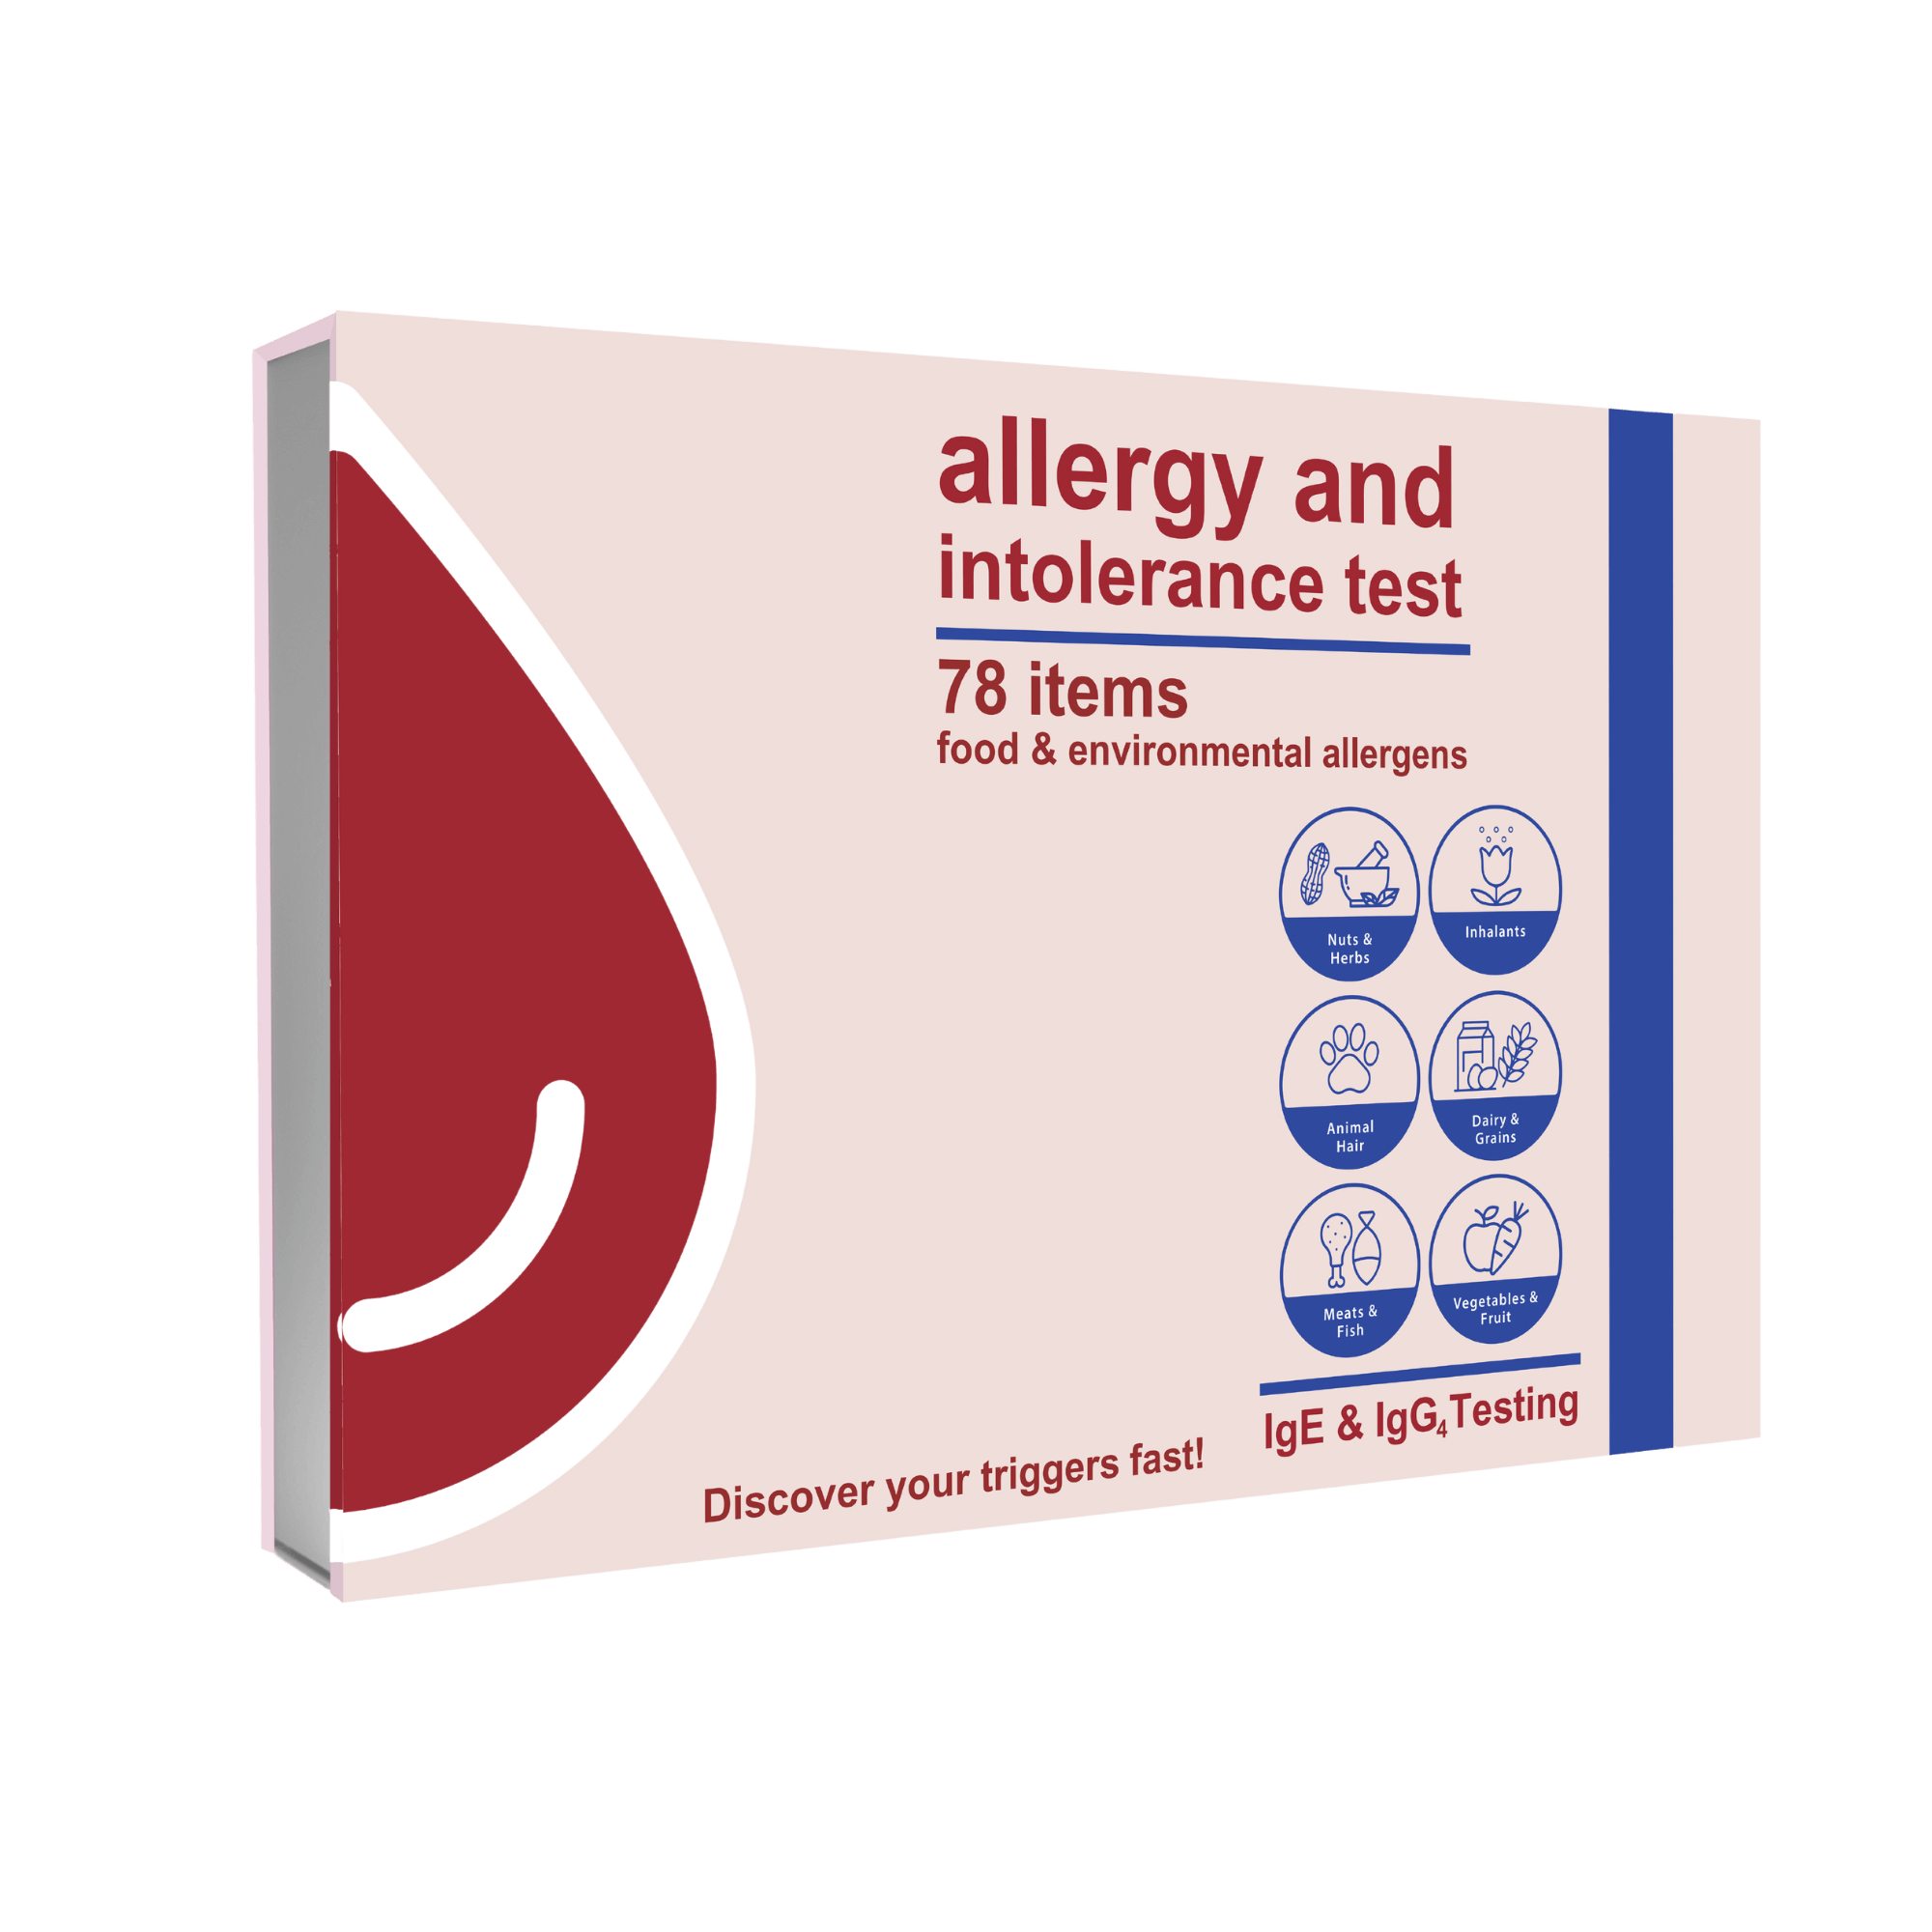 allergy intolerance test - After the test